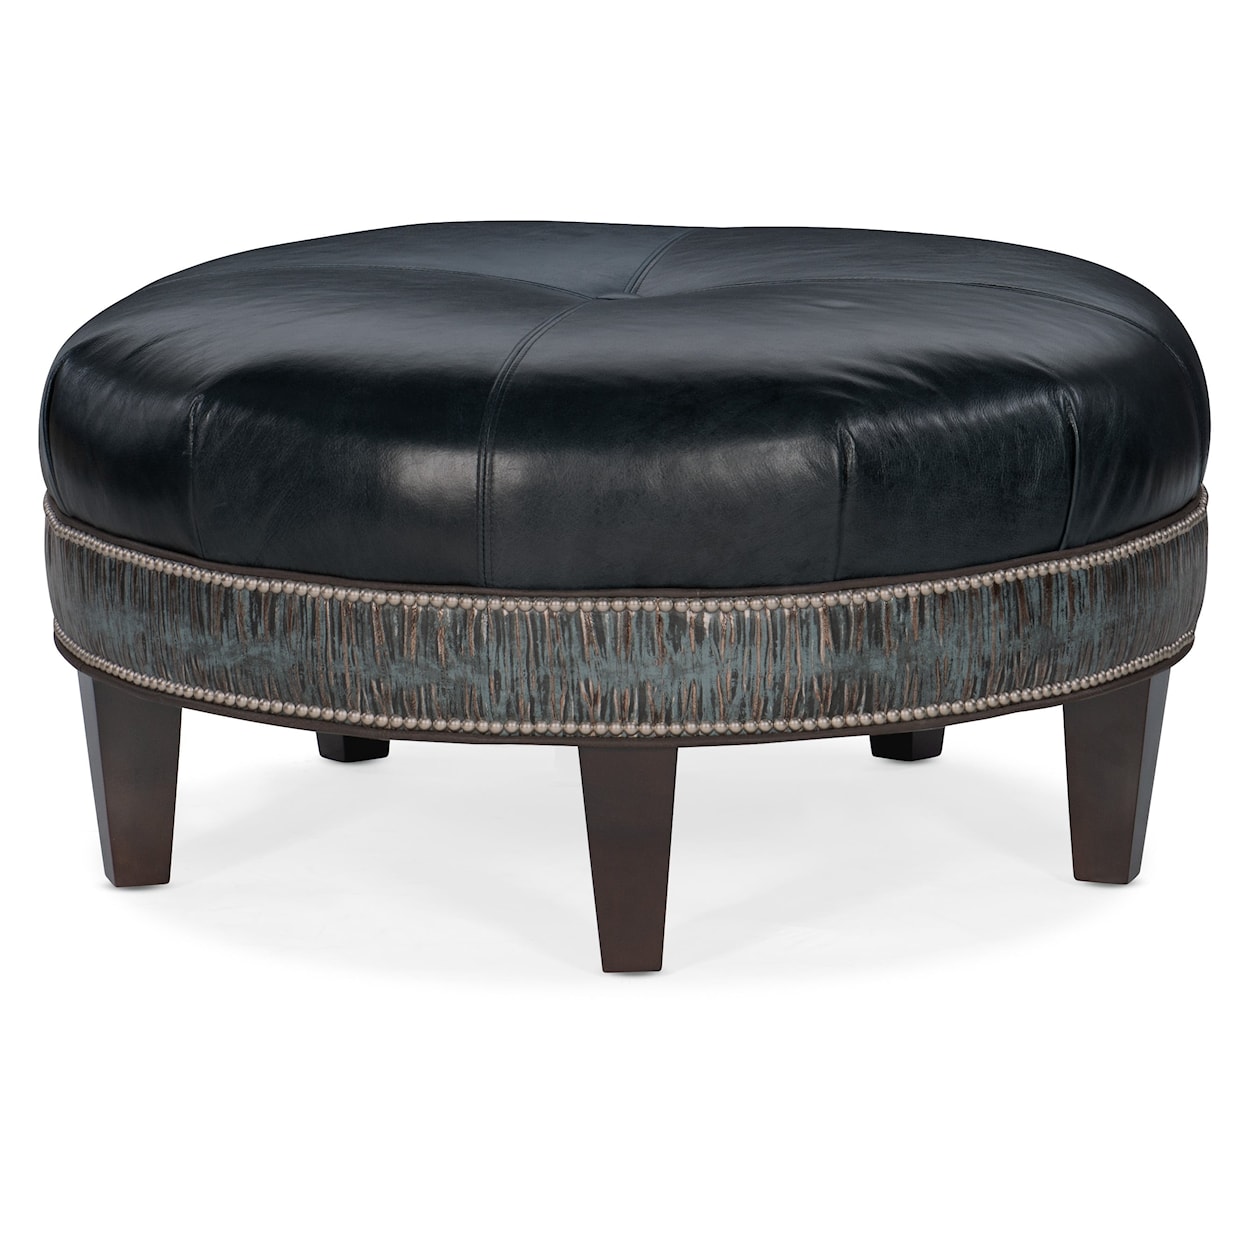 Bradington Young Well-Rounded 38 Inch Round Cocktail Ottoman